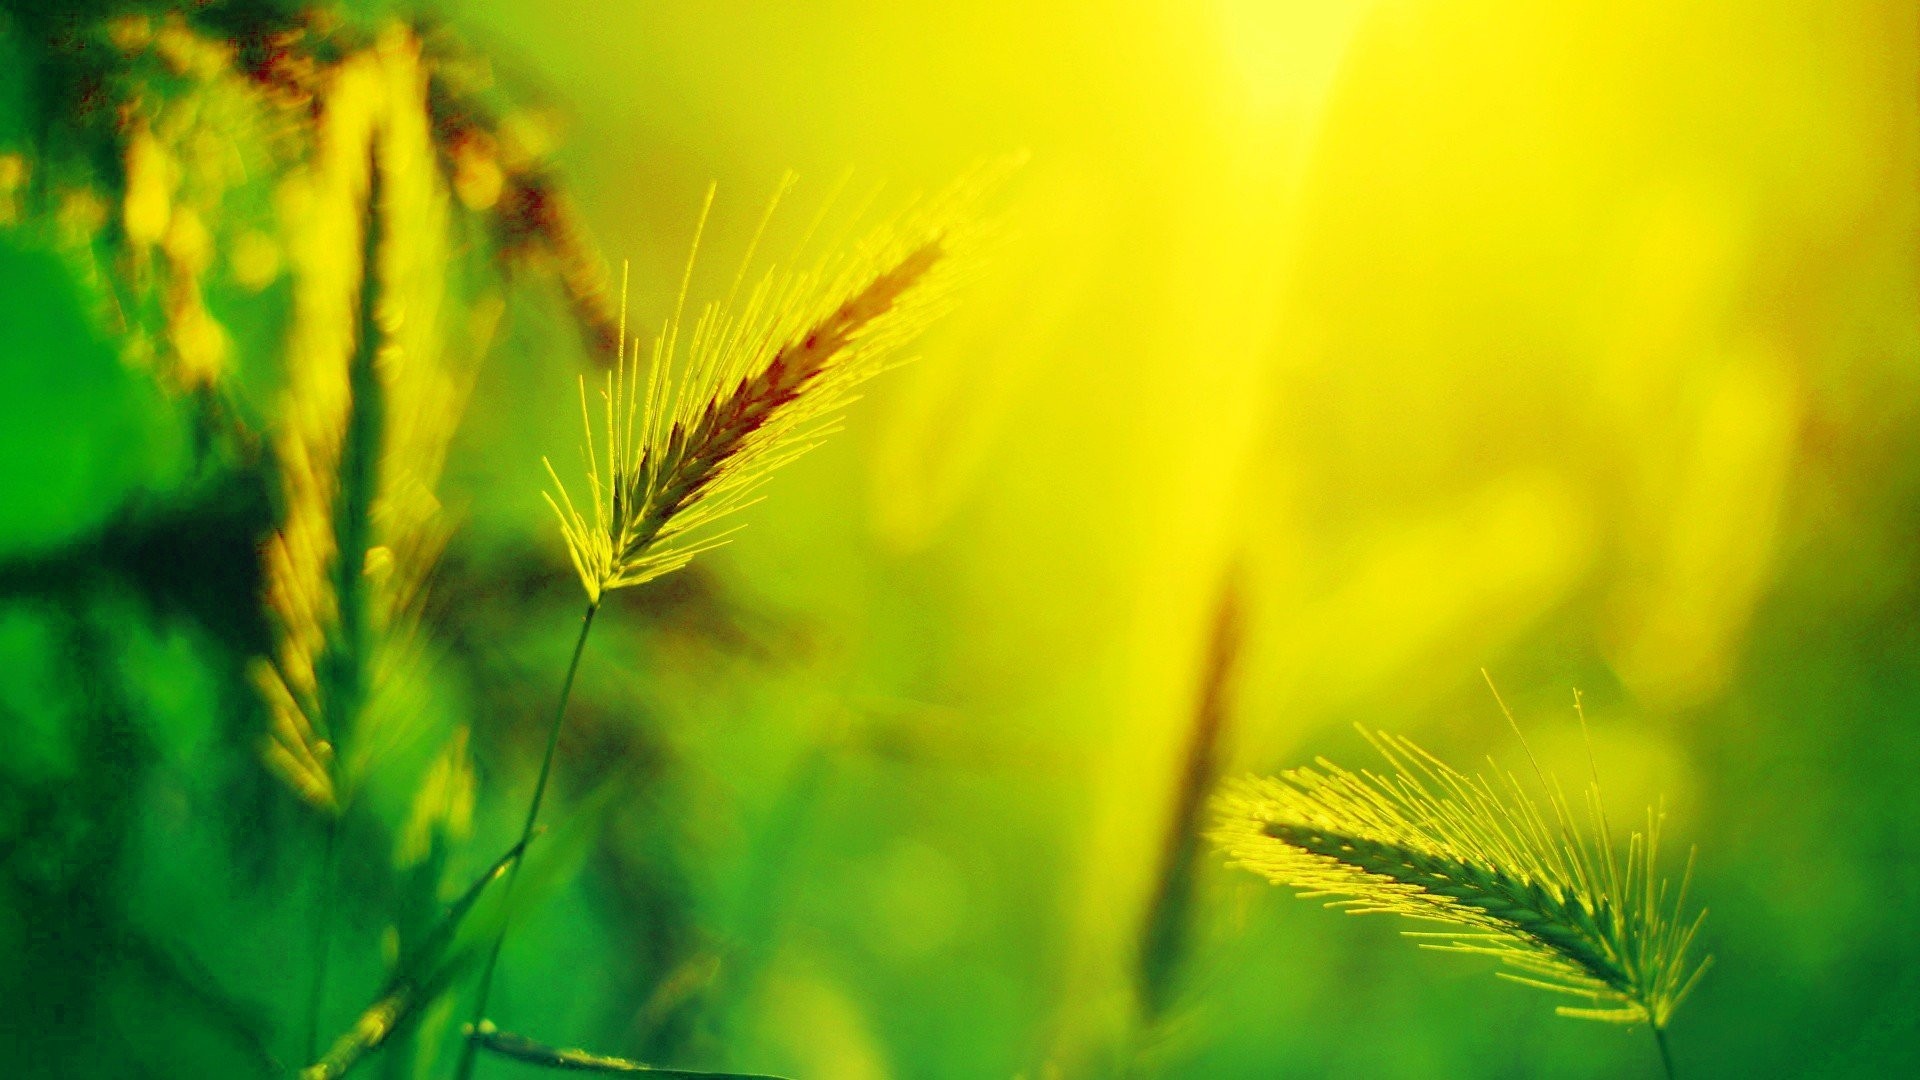 1920x1080 Grain Tag - Summer Grain Nature Wallpaper For Smartphone for HD 16:9 High  Definition